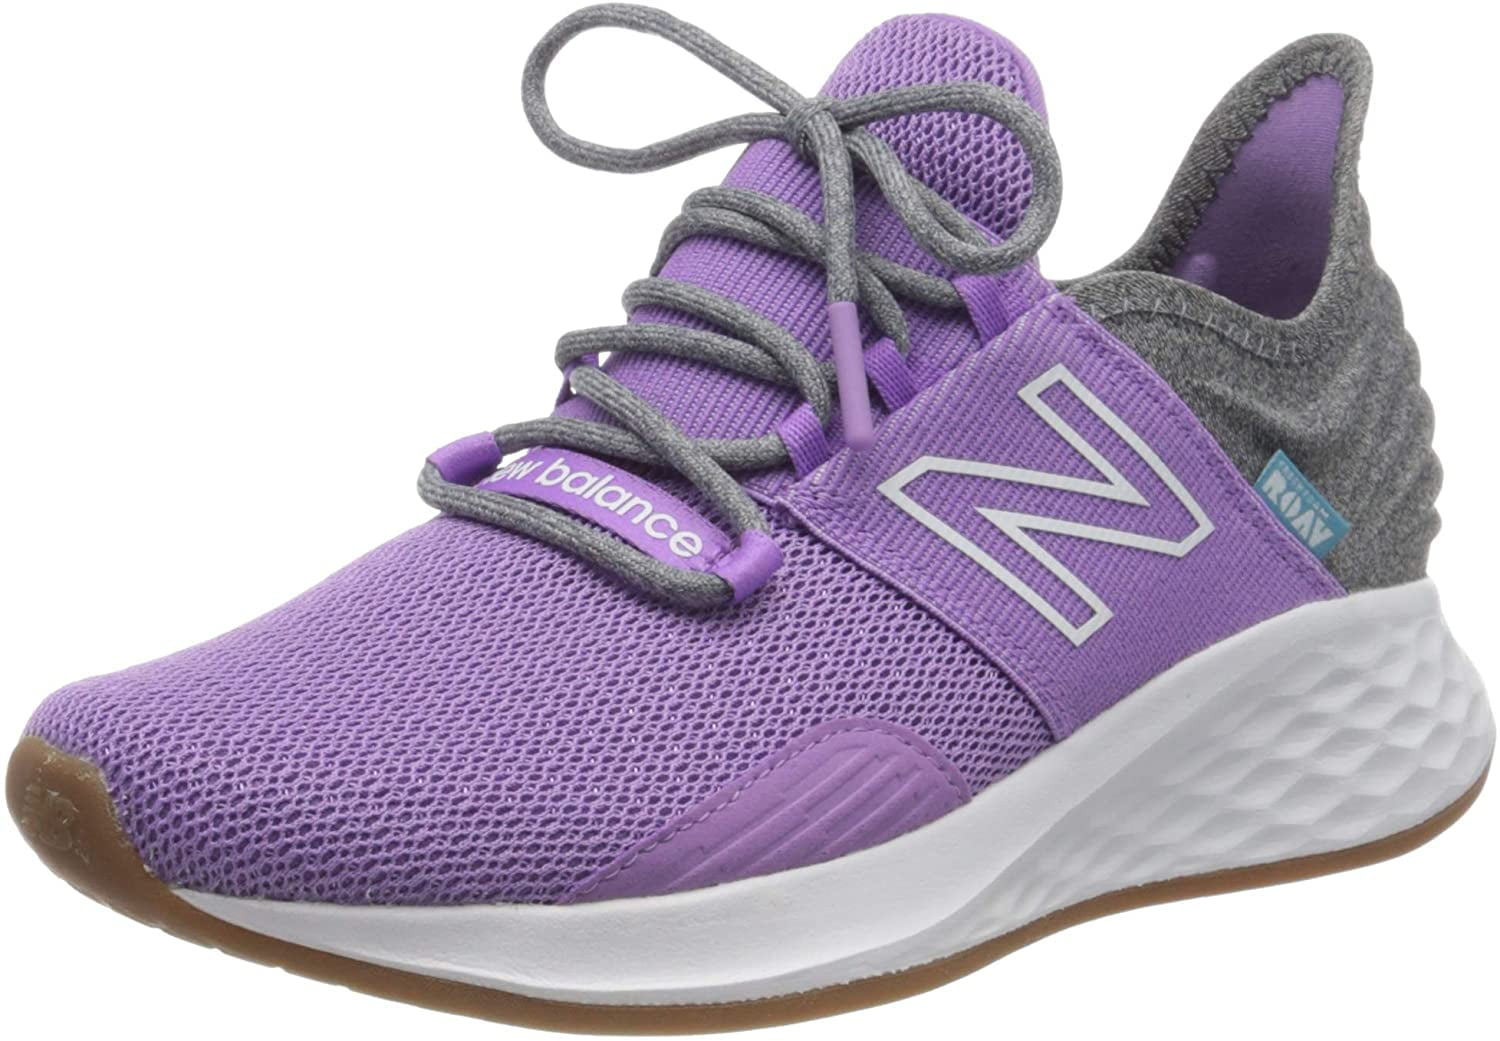 does walmart carry new balance shoes